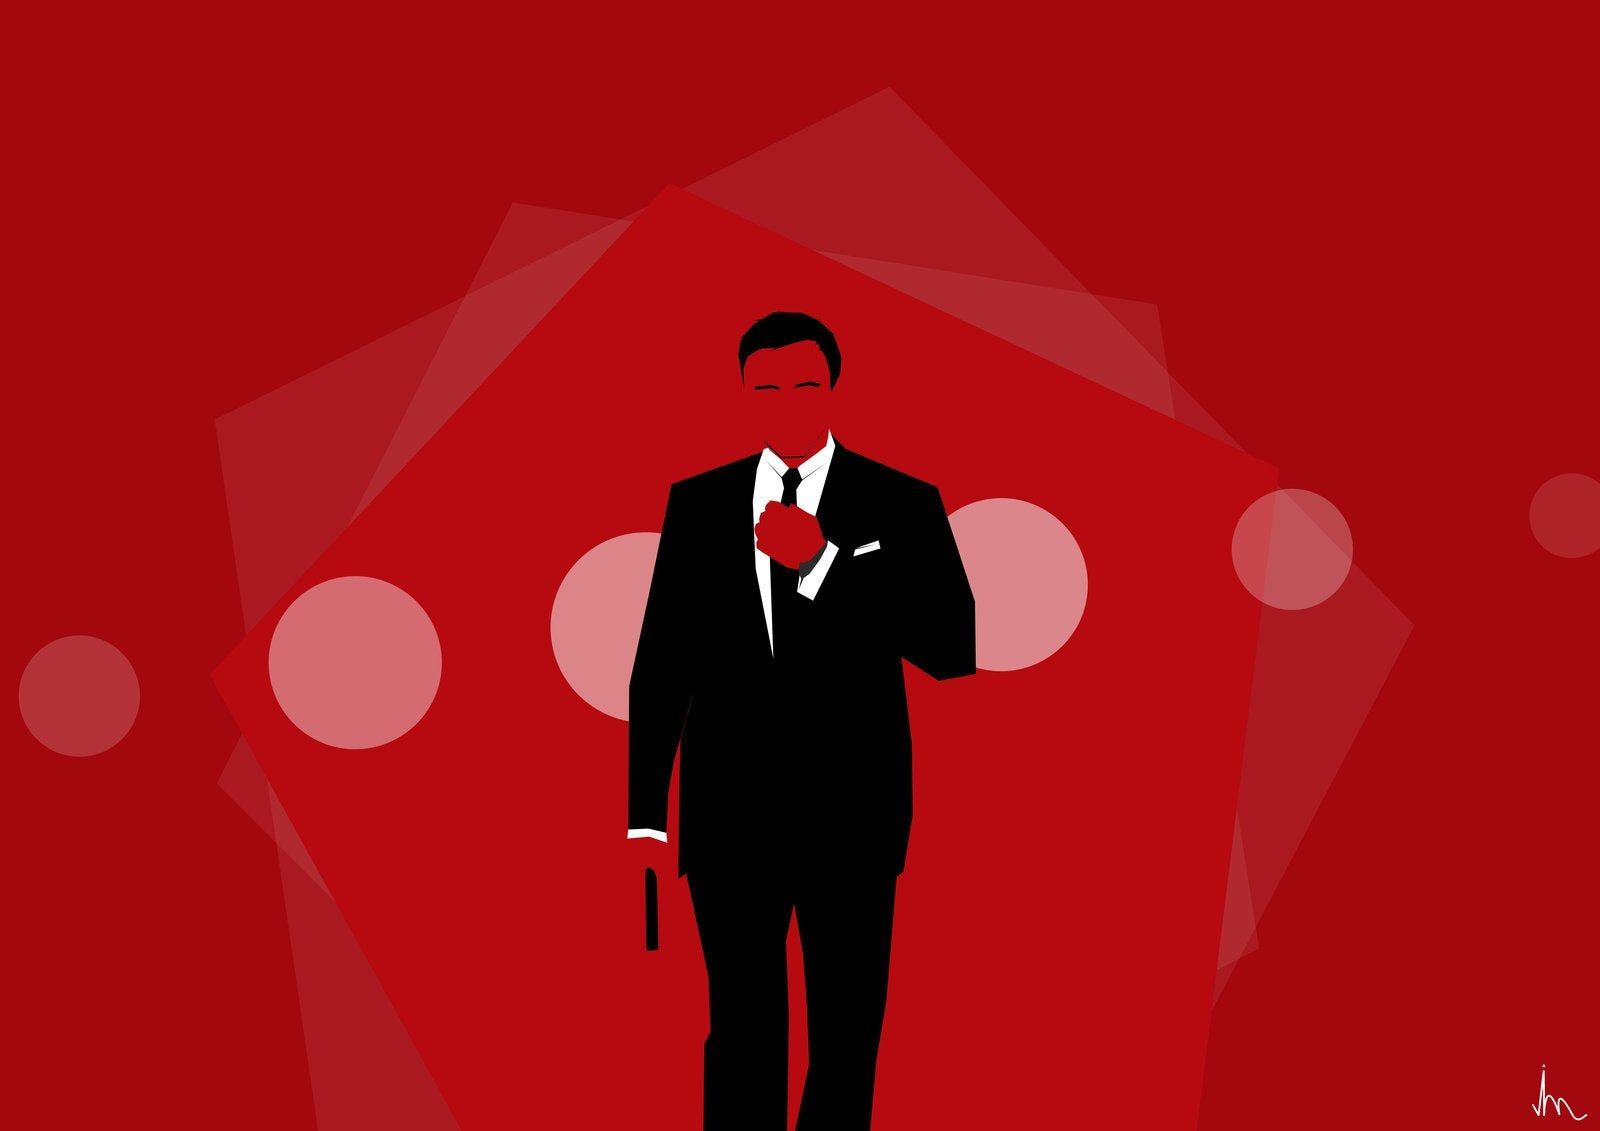 Thanks for the love, agents! Here's another 007 wallpaper I made